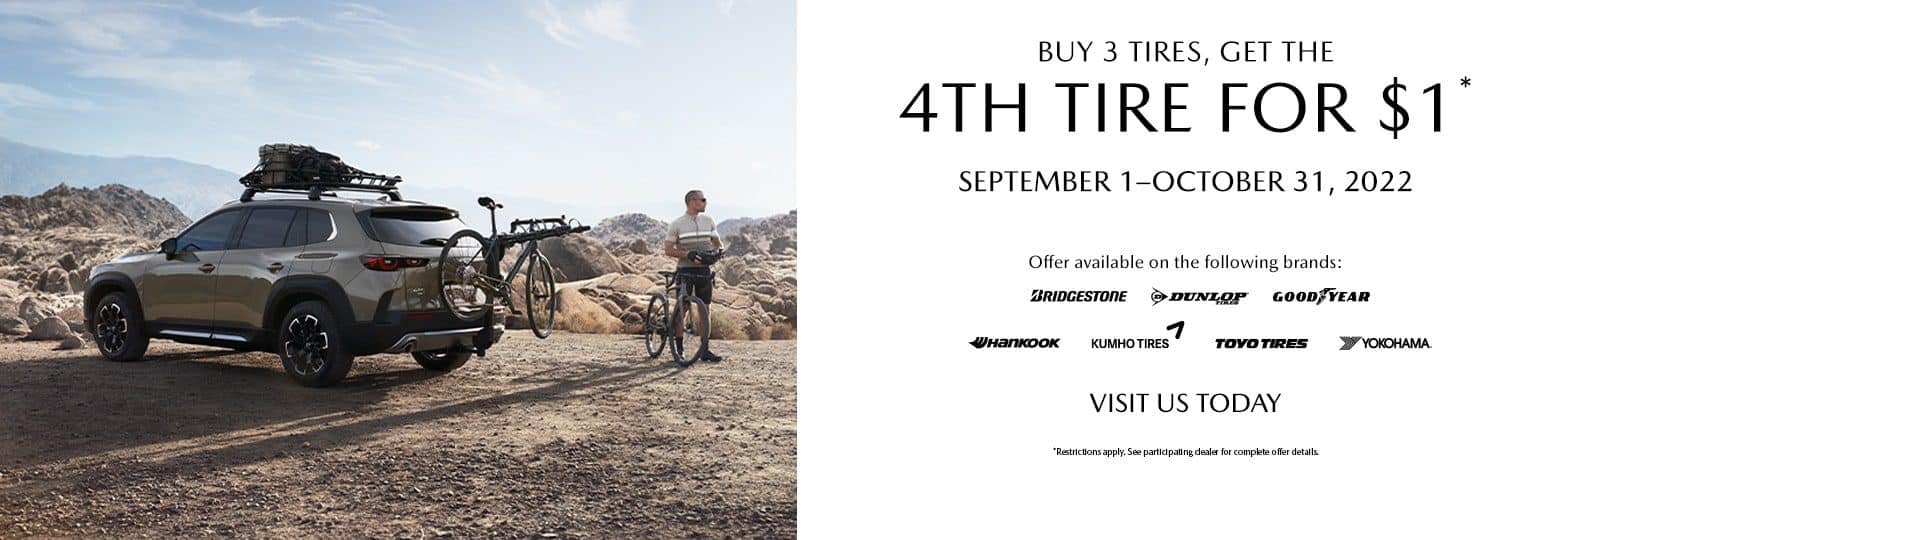 Buy 3 tires get the 4th for $1